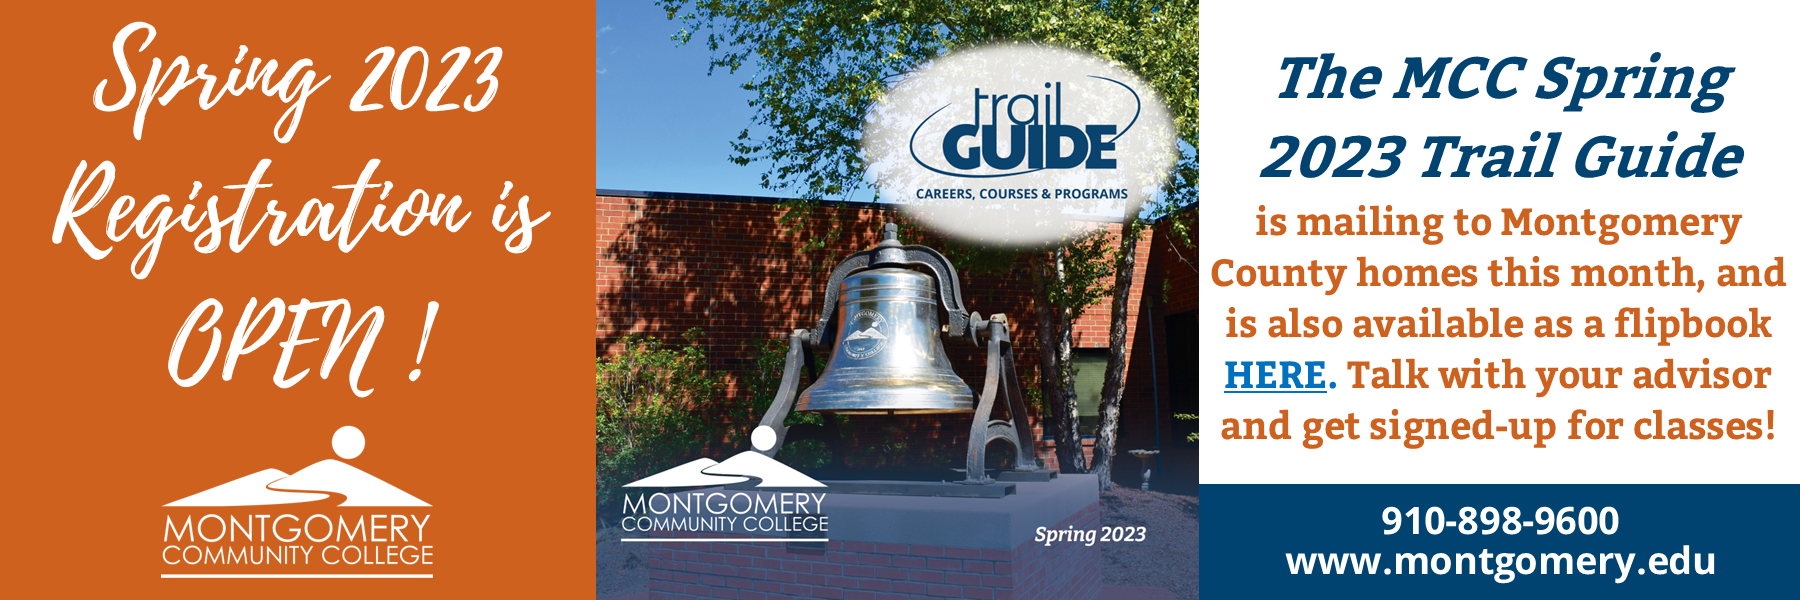 Spring 2023 registration is open! The MCC spring 2023 trail guide is mailing to montgomery county homes this month,  and is also available as a flipbook here. Talk with your advisor and get signed-up for classes! 910-898-9600 www.montgomery.edu